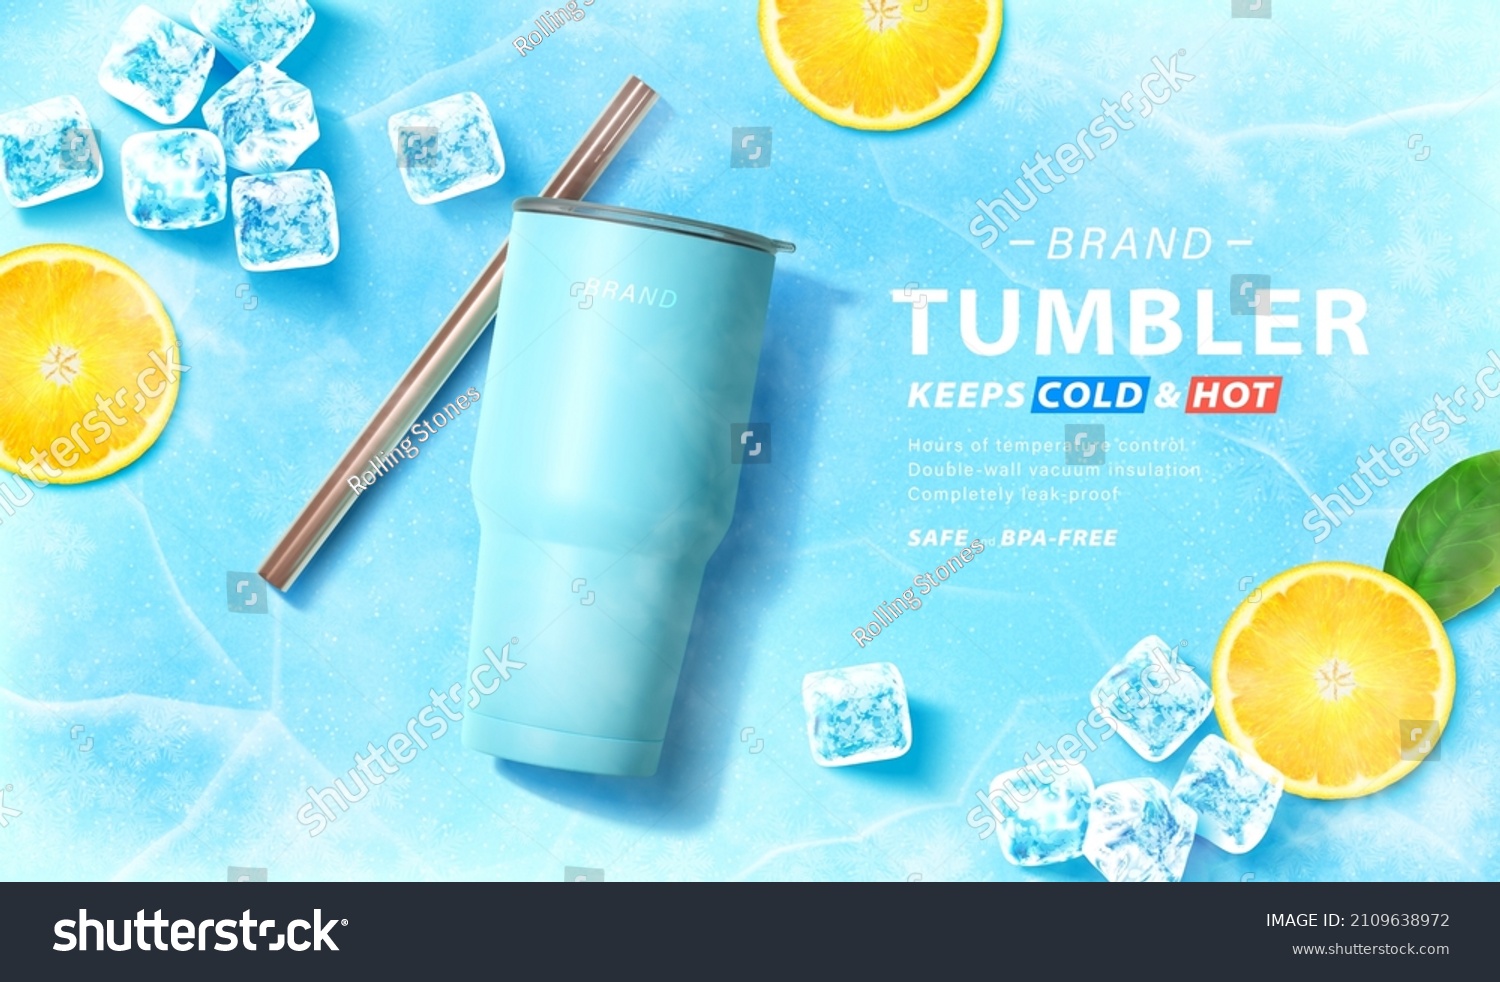 Blue tumbler banner ad. 3D Illustration of a covered tumbler bottle with its stainless straw lying on blue icy surface with ice cubes and lemon slices placed aside #2109638972